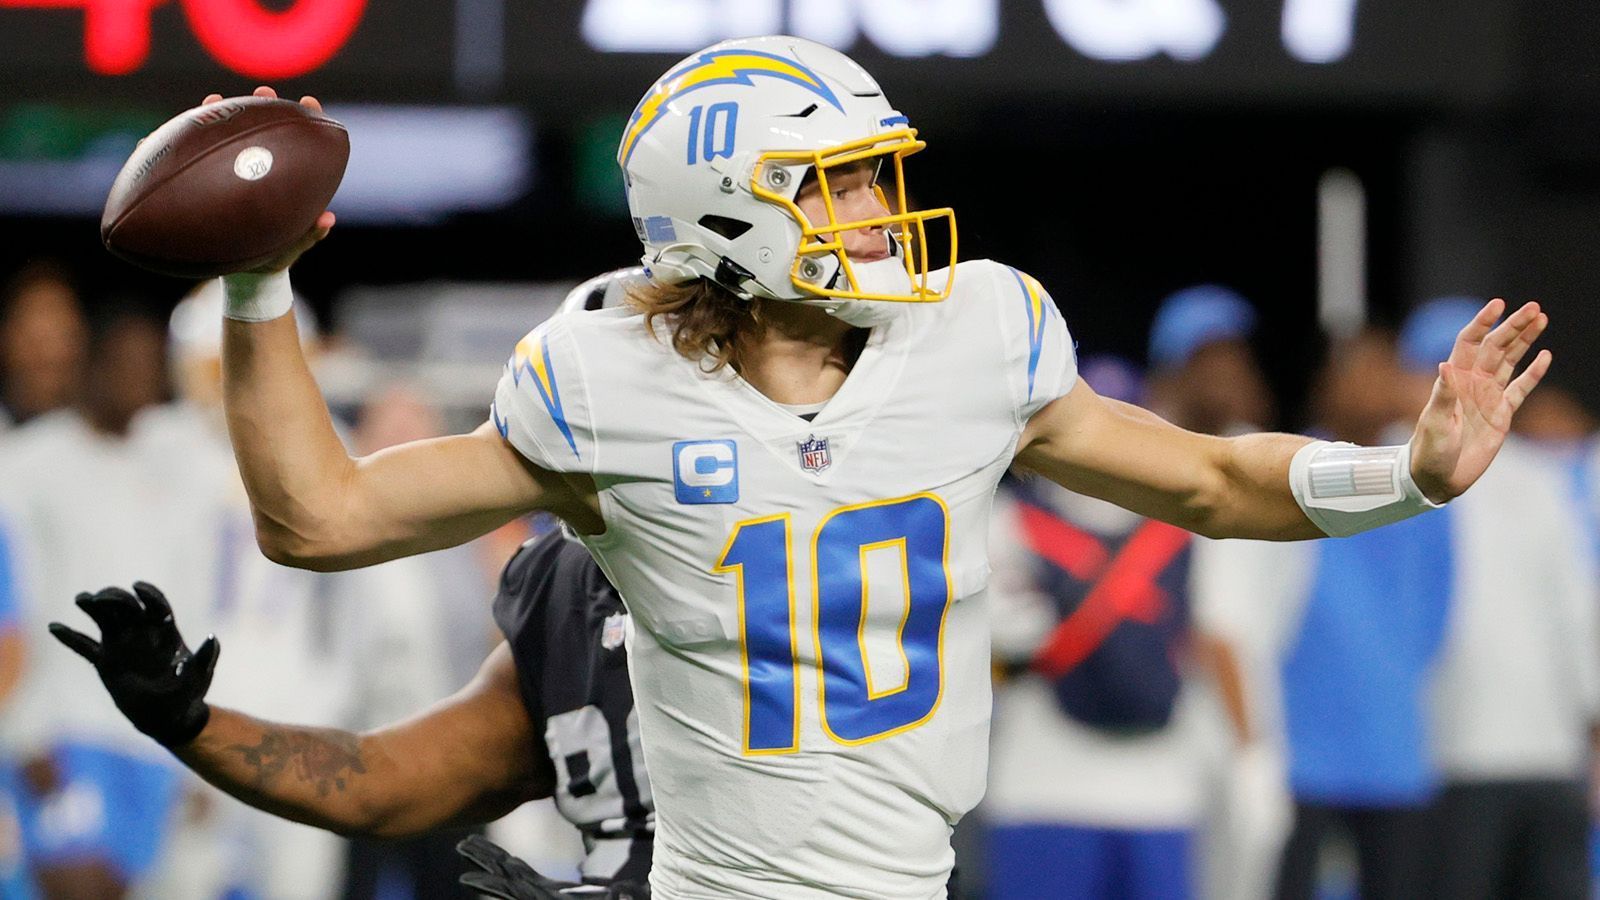 
                <strong>8. Justin Herbert</strong><br>
                &#x2022; Team: Los Angeles Chargers<br>&#x2022; Position: Quarterback<br>&#x2022; seit 2020 in der NFL<br>&#x2022; seit 2020 im Team<br>
              